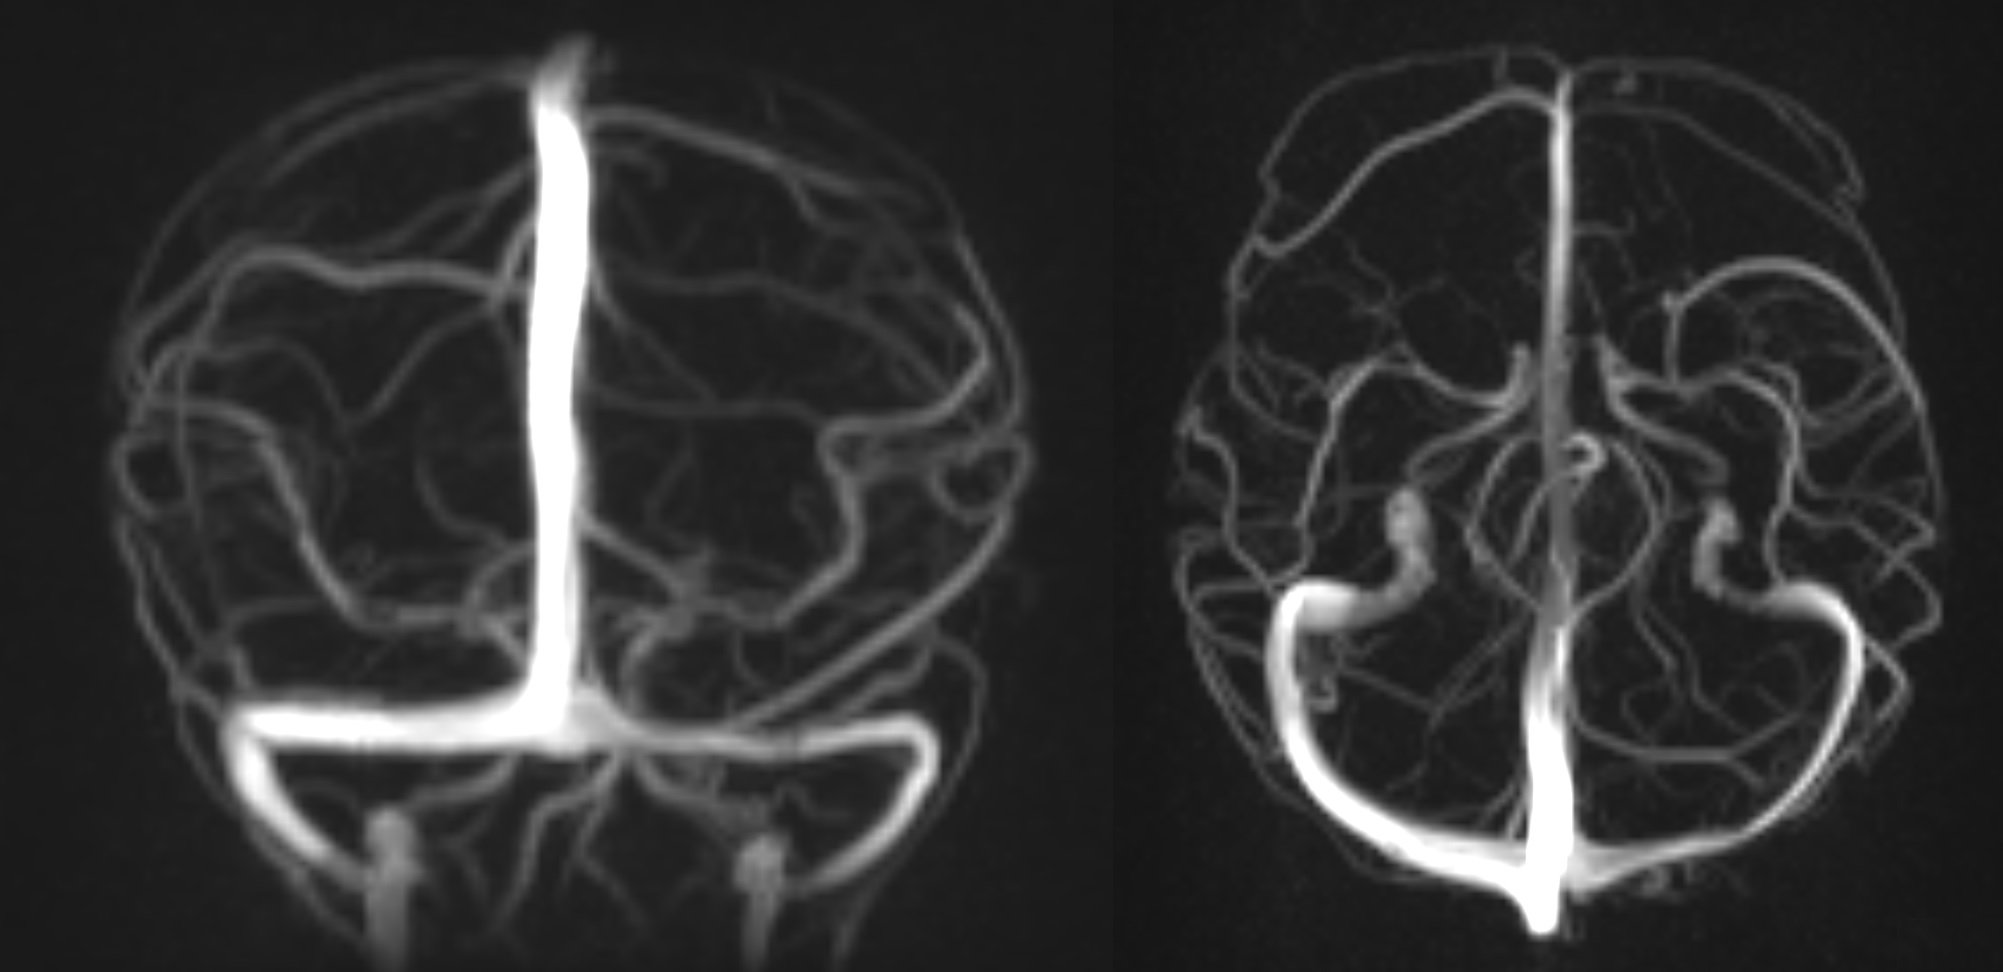 Coronal and axial "phase contrast" 3D reconstruction of cerebral venous system.